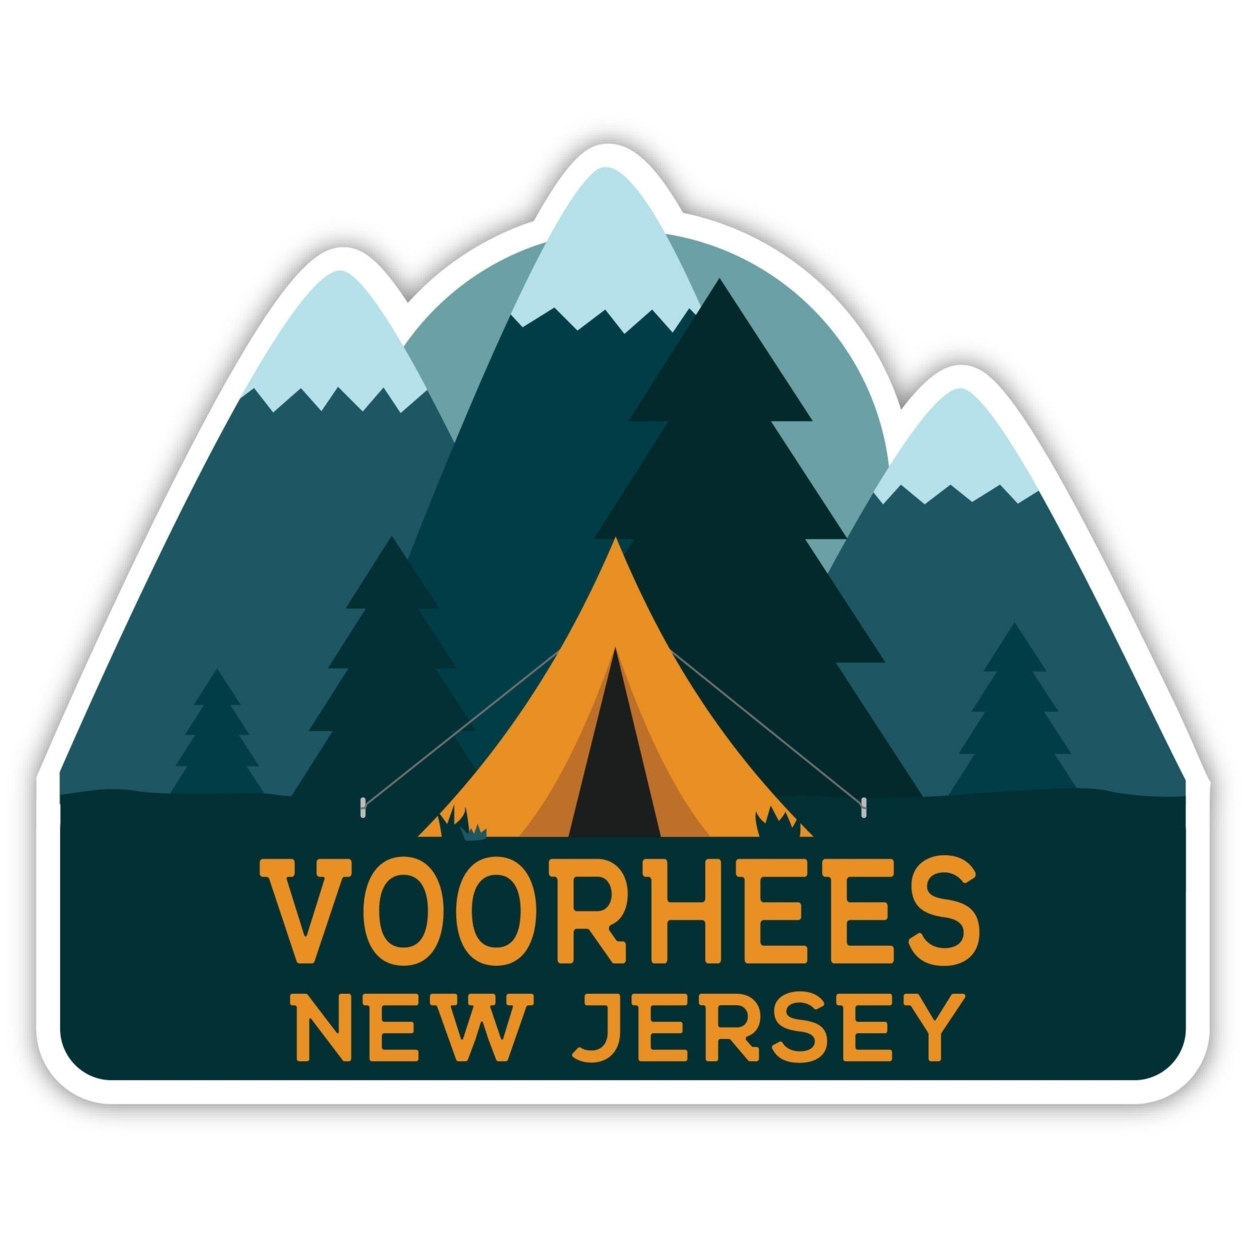 Voorhees New Jersey Souvenir Decorative Stickers (Choose Theme And Size) - Single Unit, 4-Inch, Tent